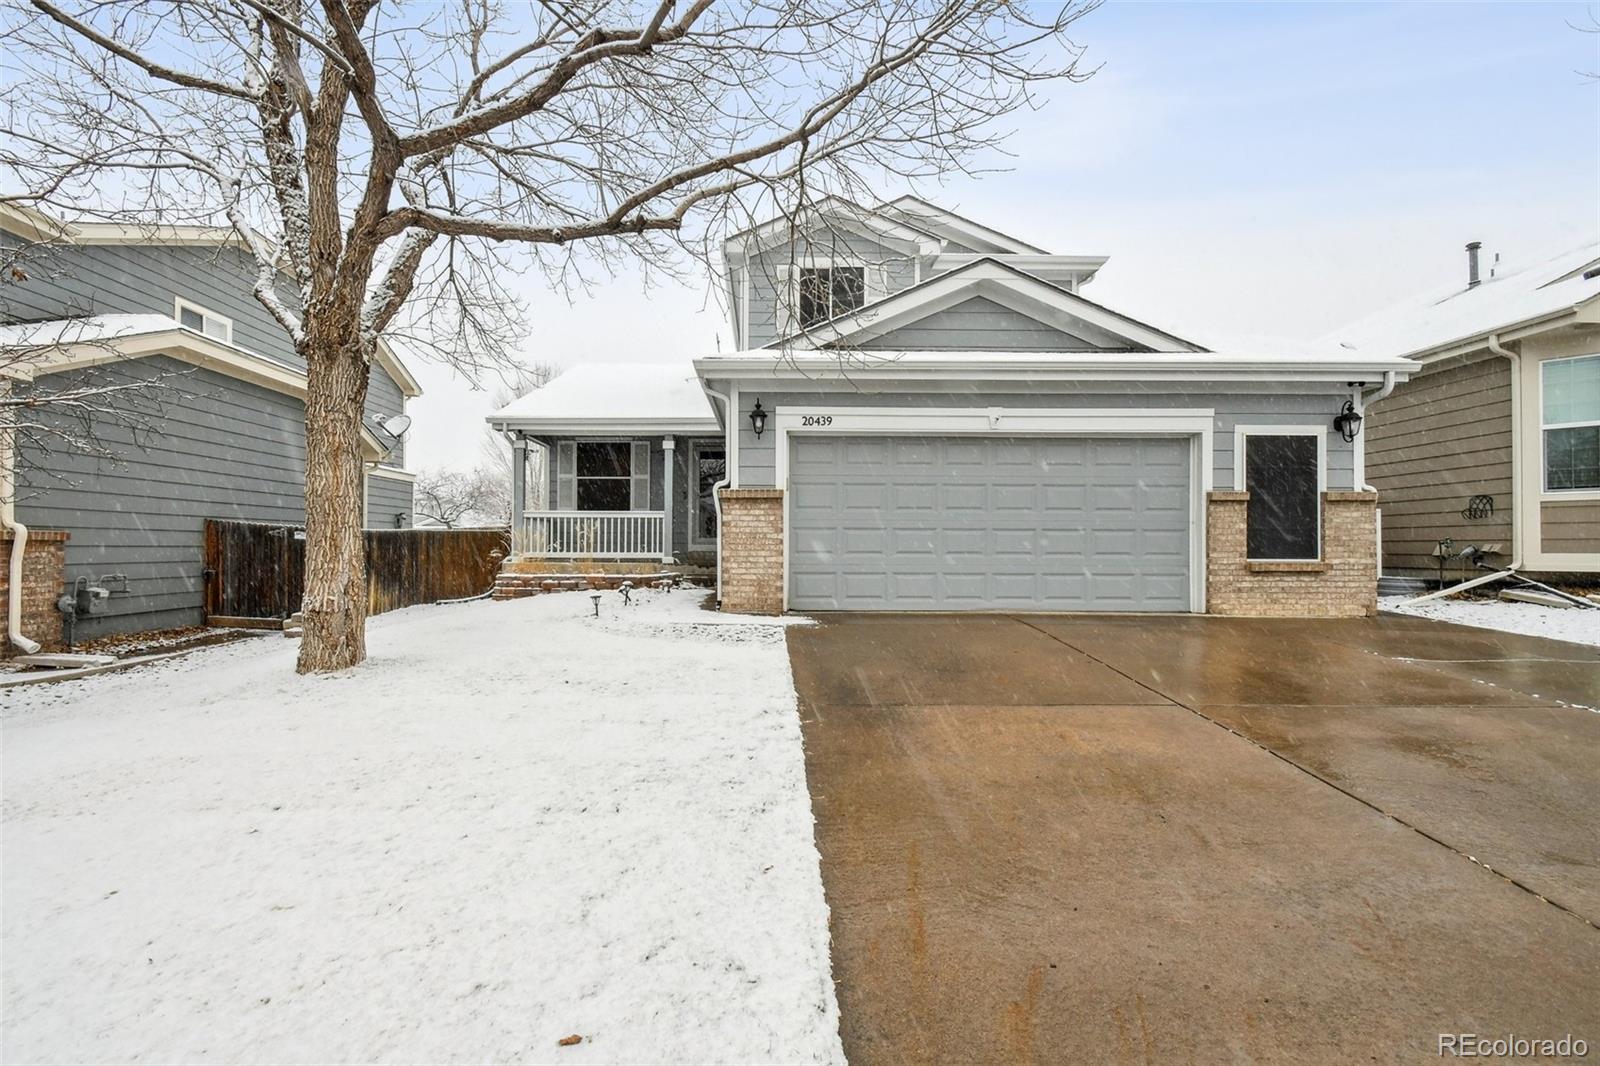 20439 e bellewood place, aurora sold home. Closed on 2024-03-26 for $569,000.